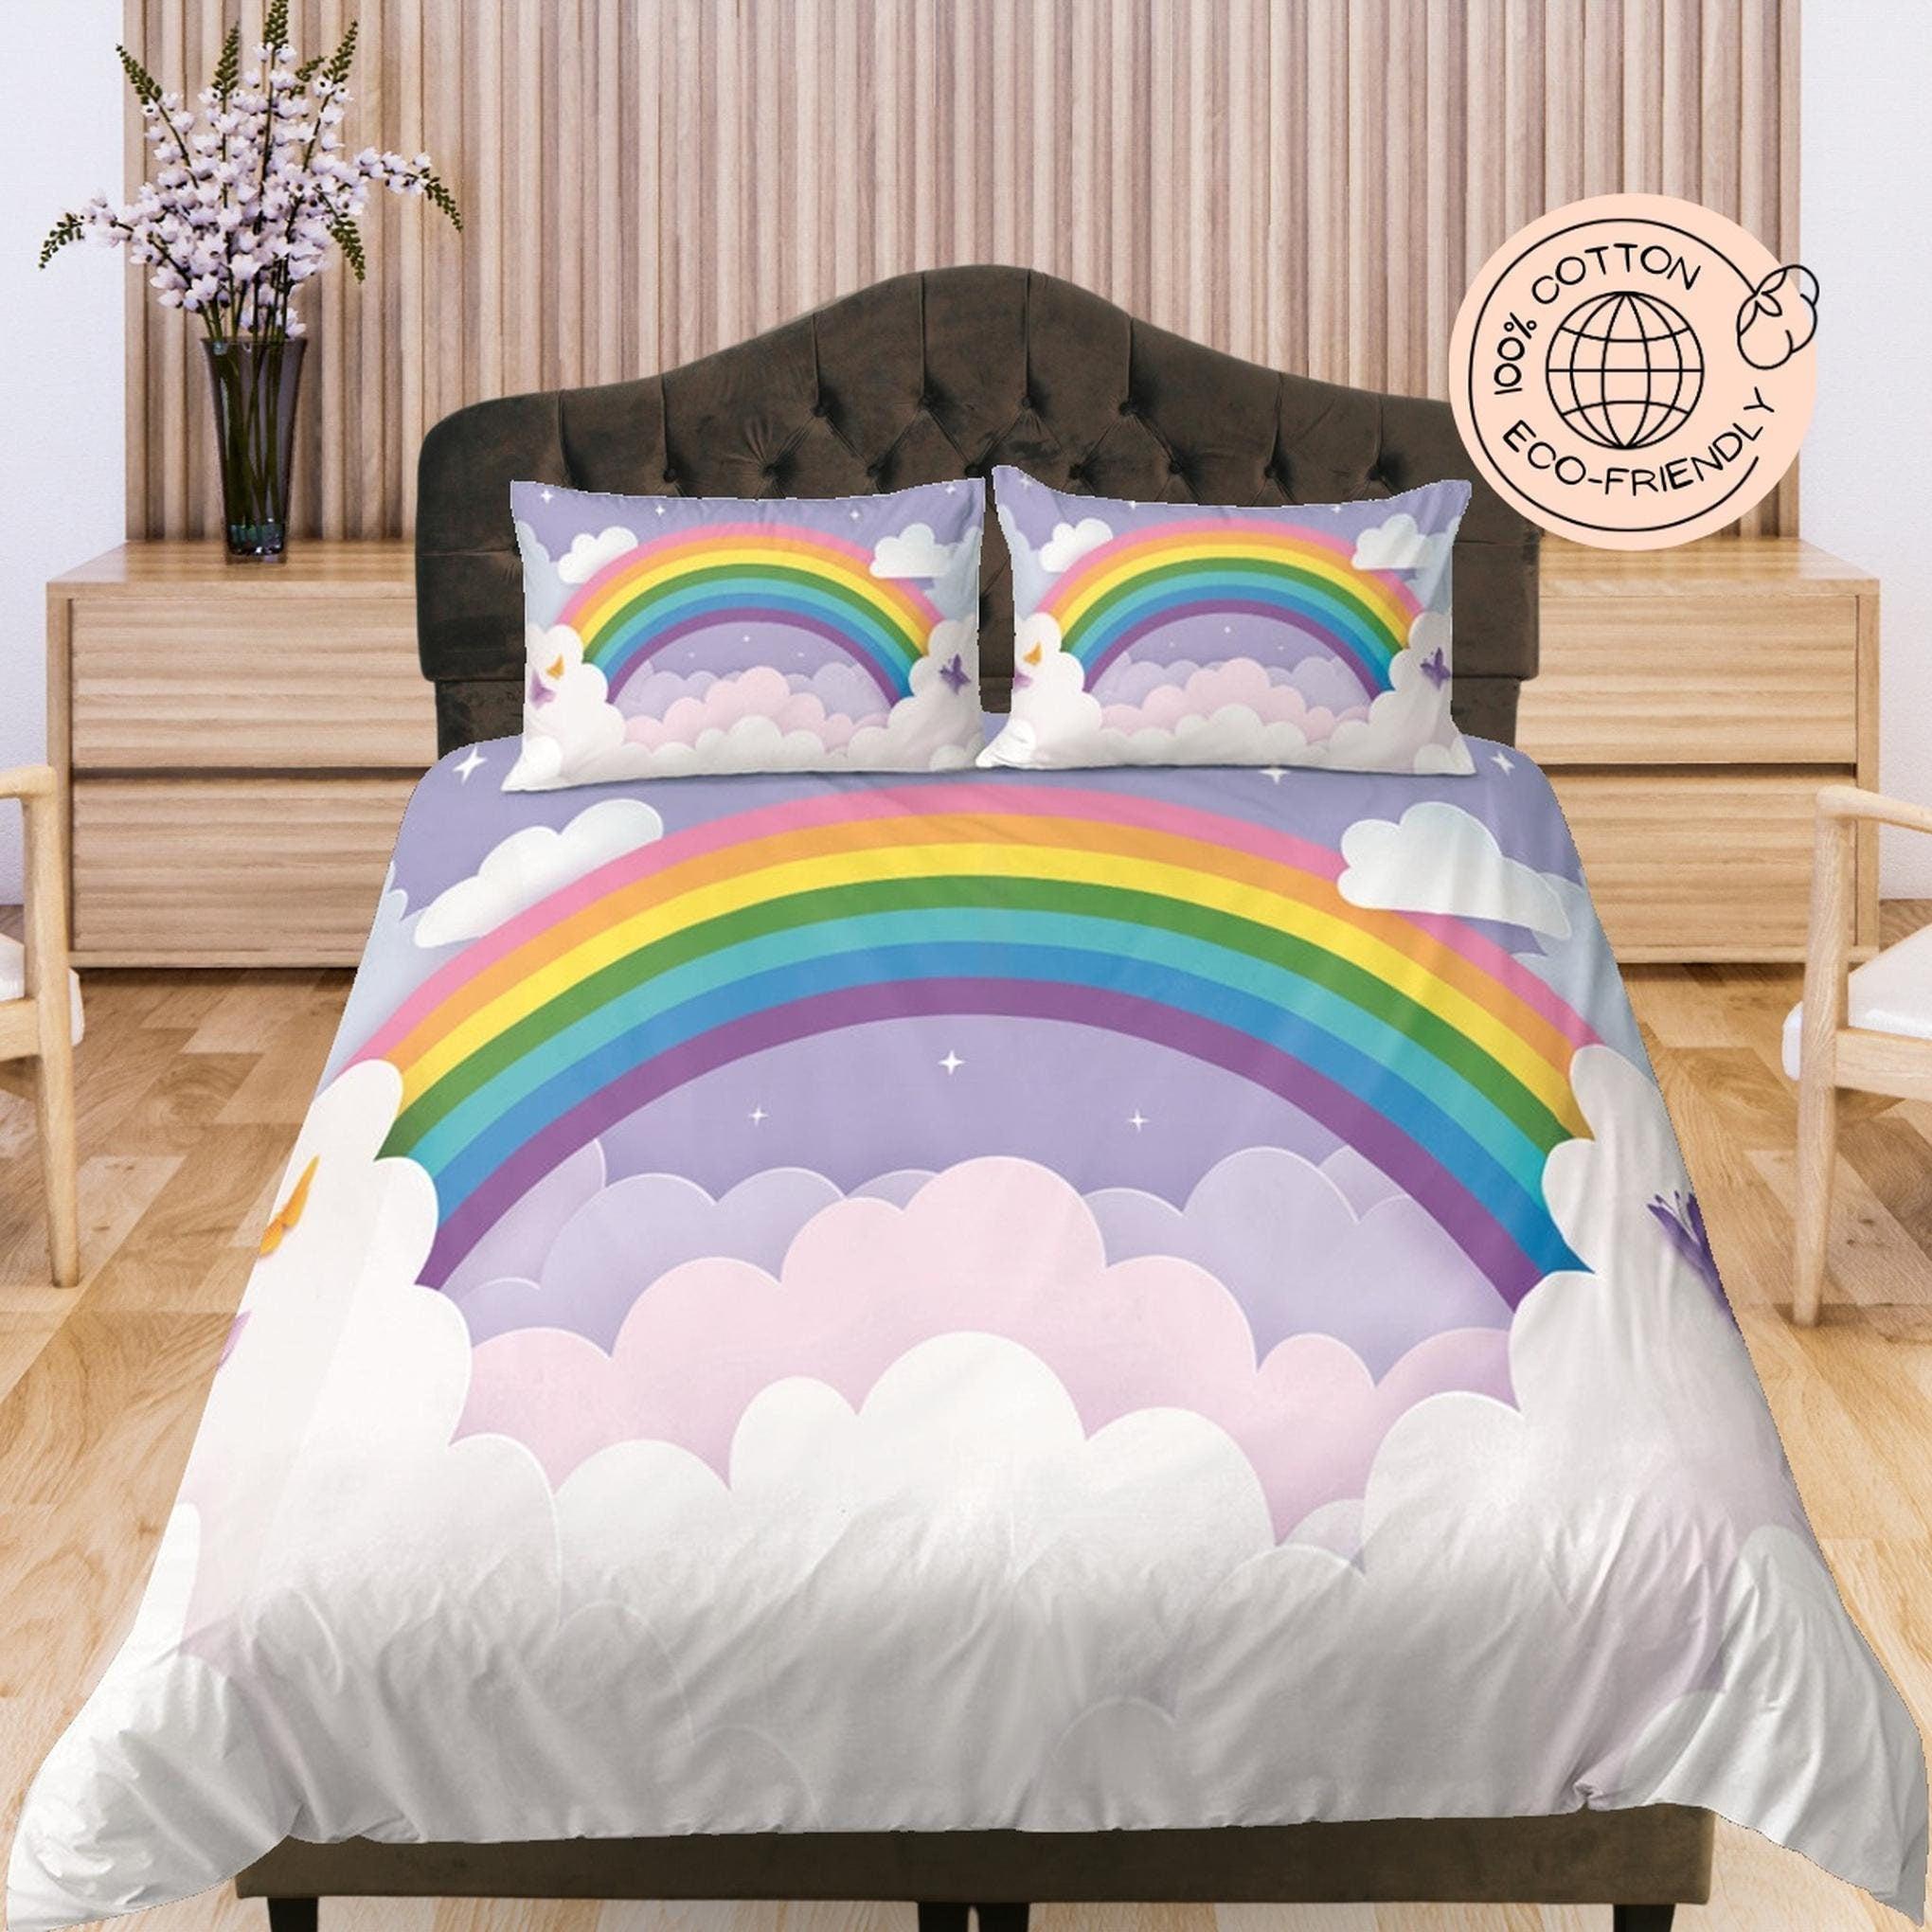 daintyduvet Rainbow and Clouds Cotton Duvet Cover Set for Kids, Coloful Toddler Bedding, Baby Zipper Bedding, Nursery Cotton Bedding, Crib Blanket